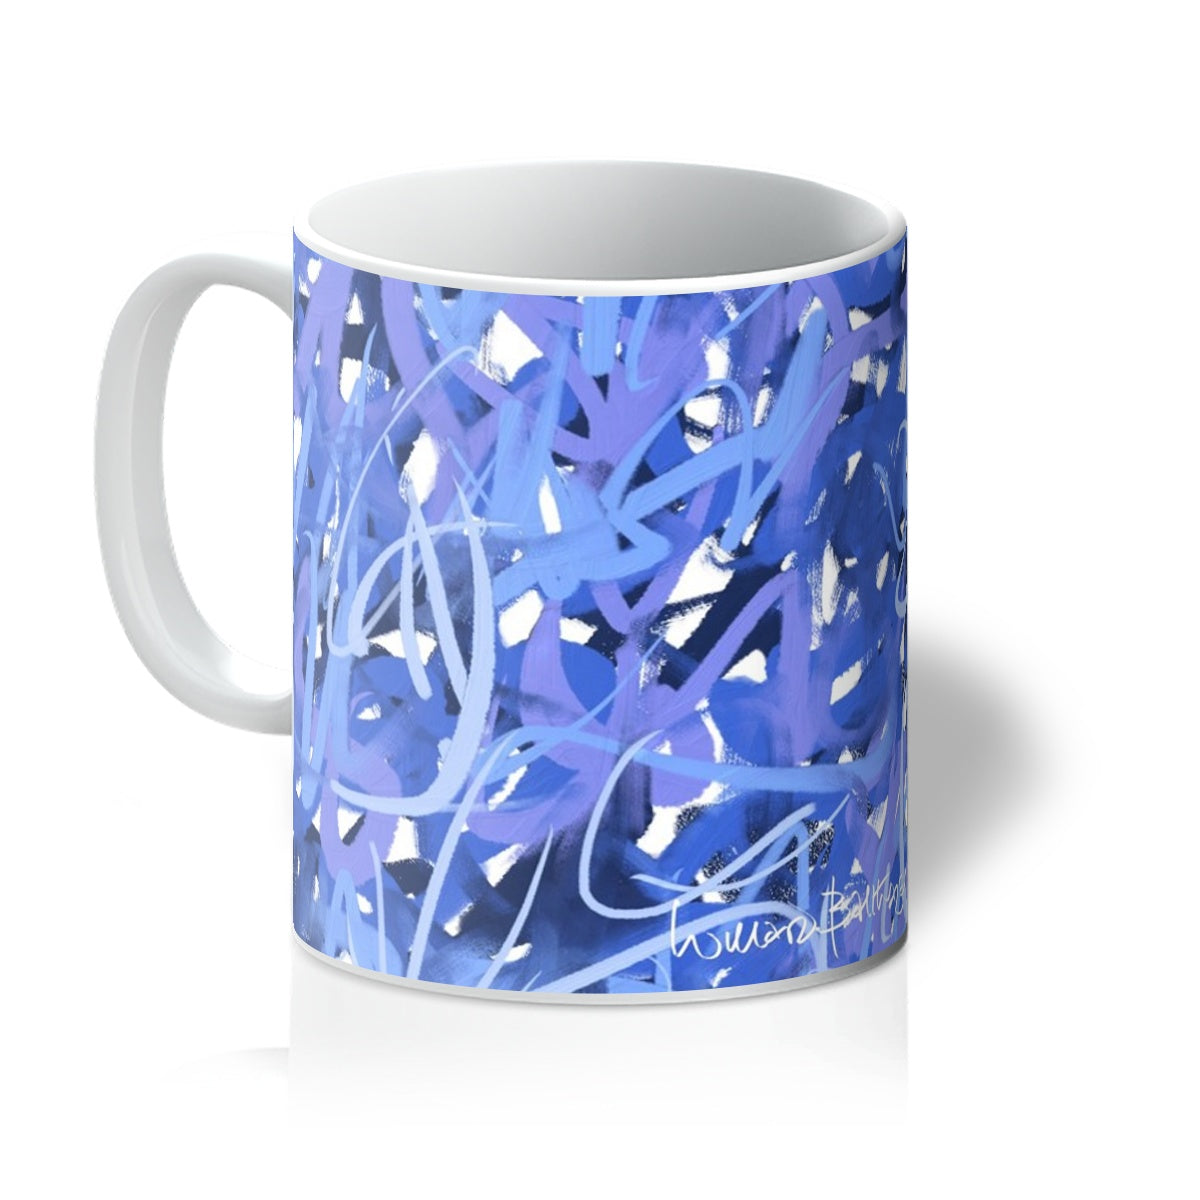 'A Touch Of Frost' - Mug